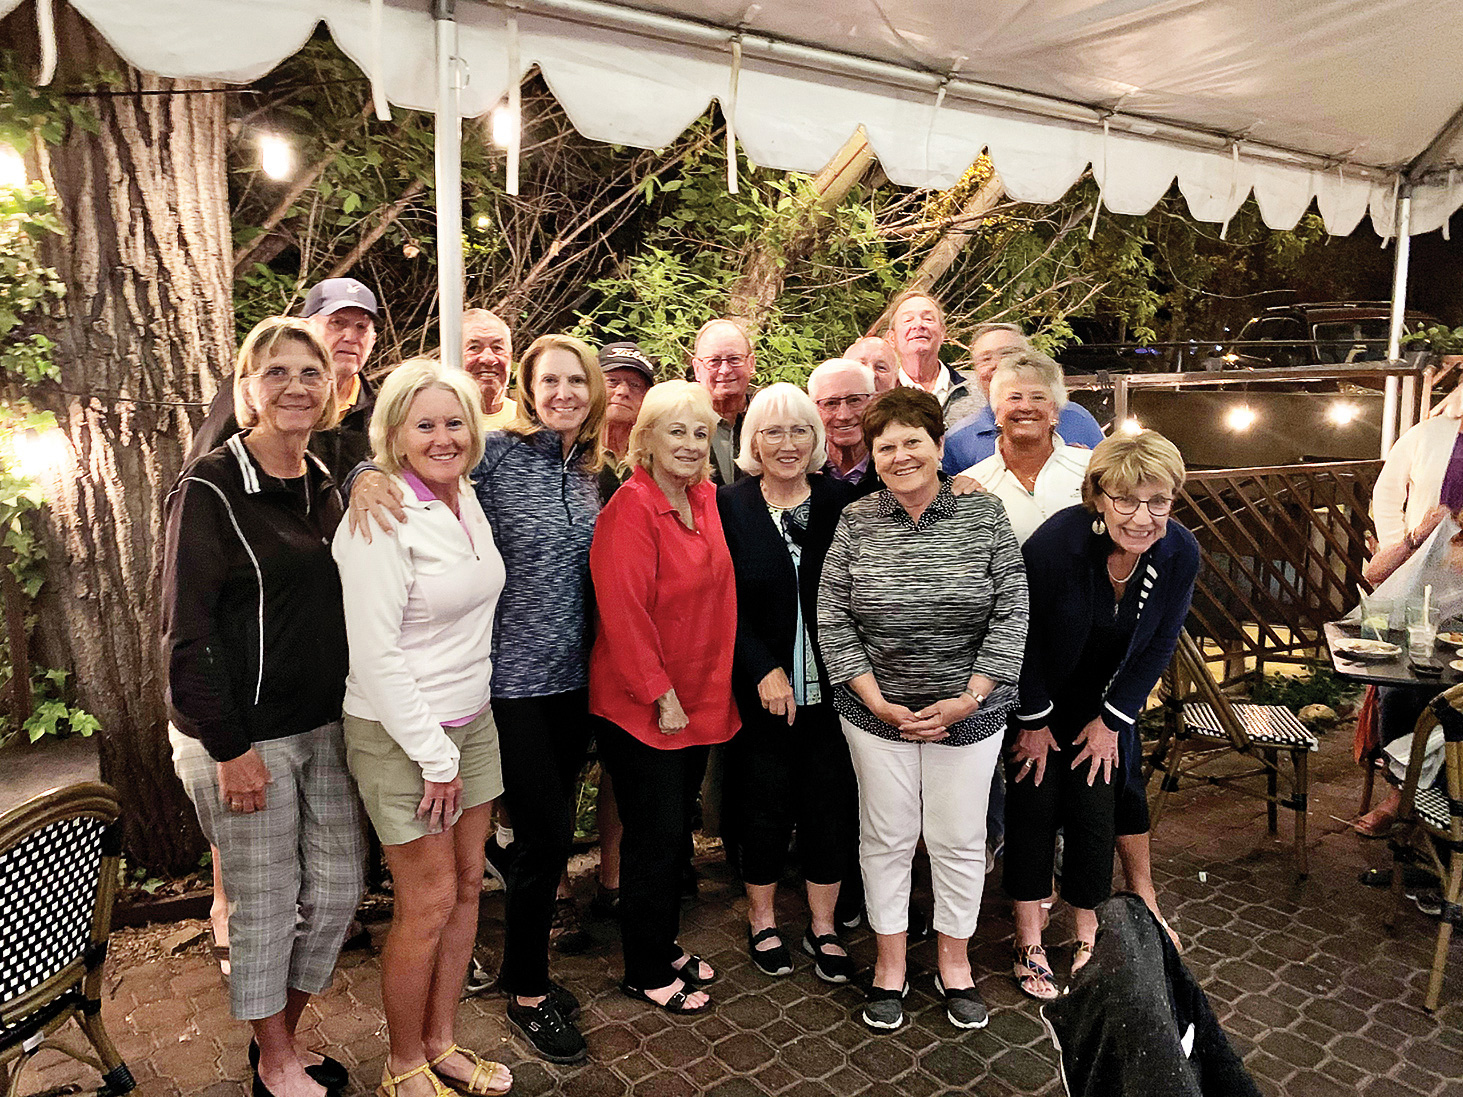 Sunday couples golfers and friends out for dinner in Prescott. Front row (left to right): Mary Barry, Mary Pinski, Jayne Dinan, Kathy Carney, Barb Chilton, Sharon Johnson, Lynn Grice, Sue White; Back row: John Barry, Dennis Grice, Al Carney, Lloyd Chilton, Terry Johnson, Mike Pinski, Mike Dinan, and Jerry White